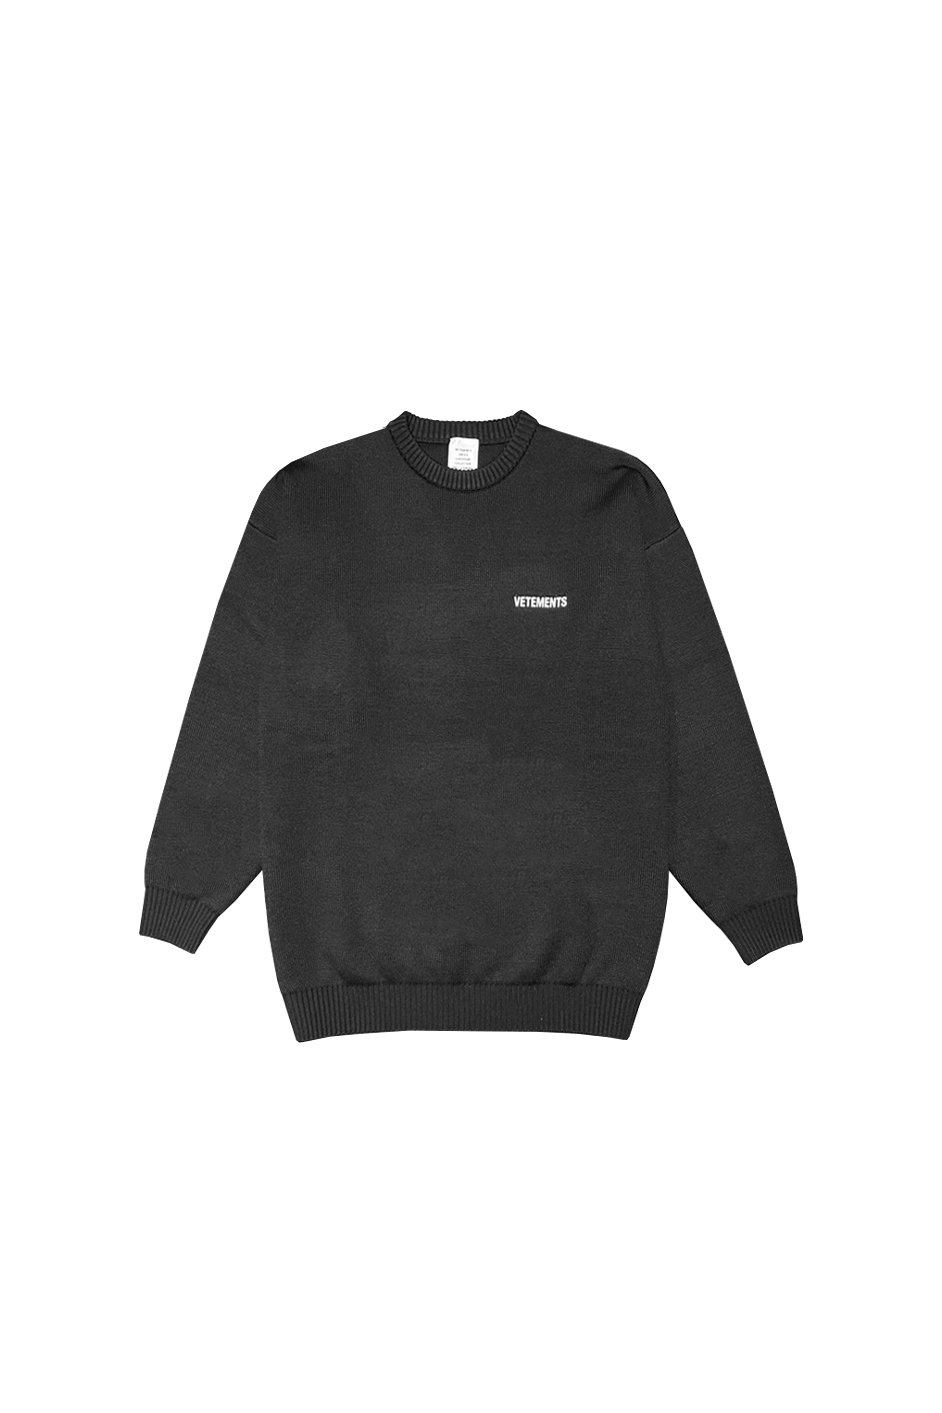 ICONIC LOGO KNITTED JUMPER